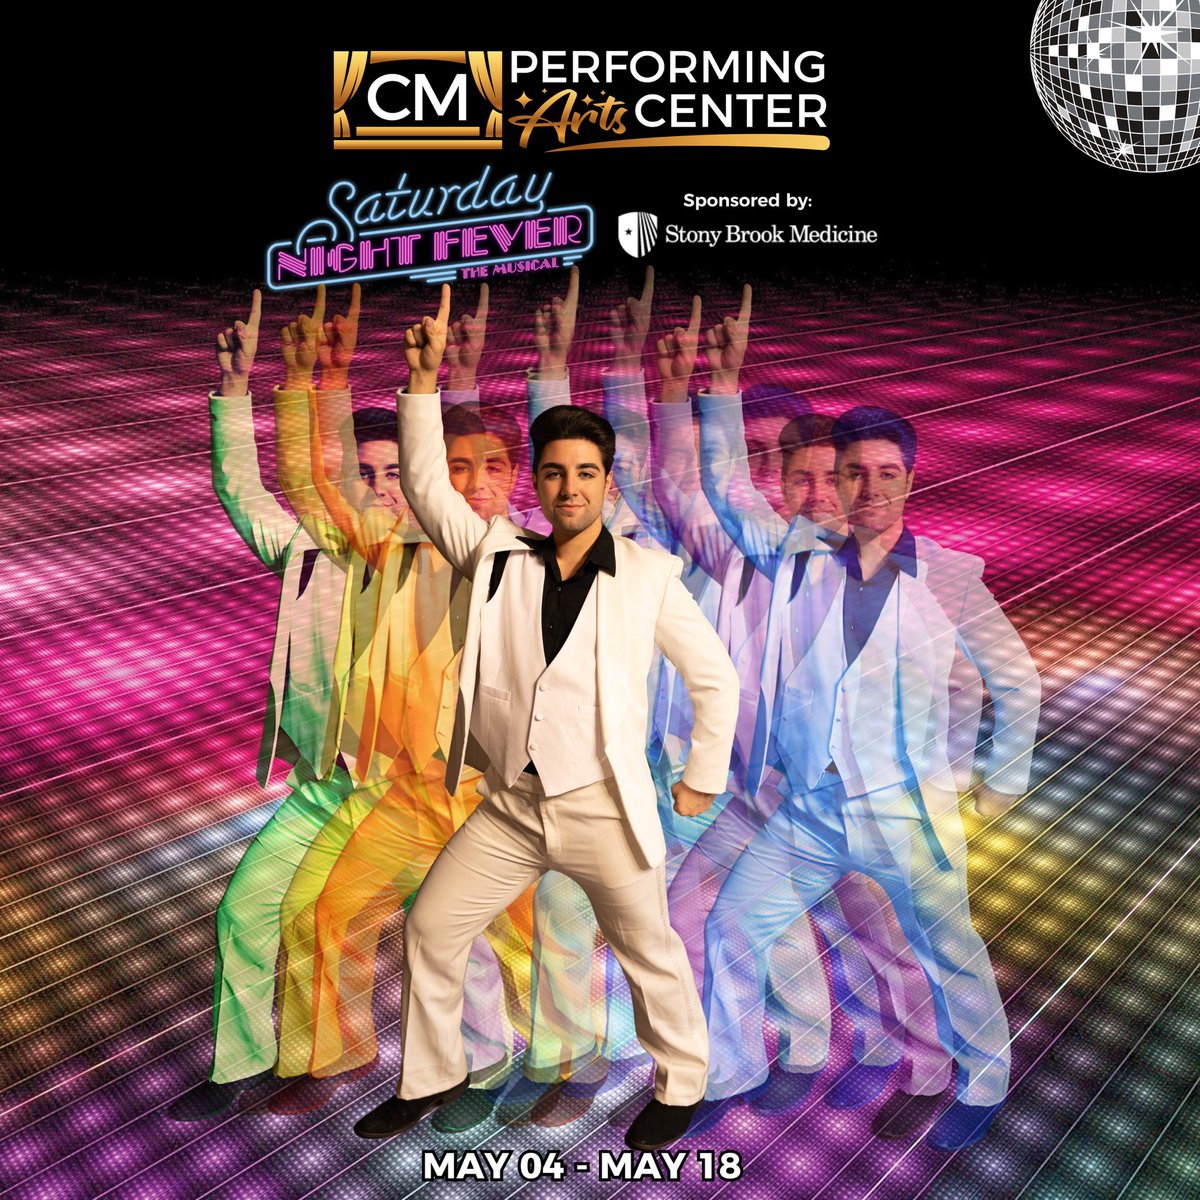 Speaking of #JukeboxMusicals, our next #MainStage show, closing out #Season52 is #SaturdayNightFever, #Sponsored by @StonyBrookMed, featuring the #Music of The @BeeGees 

#Tickets are selling hotter than a #DiscoInferno! Go to CMPAC.com